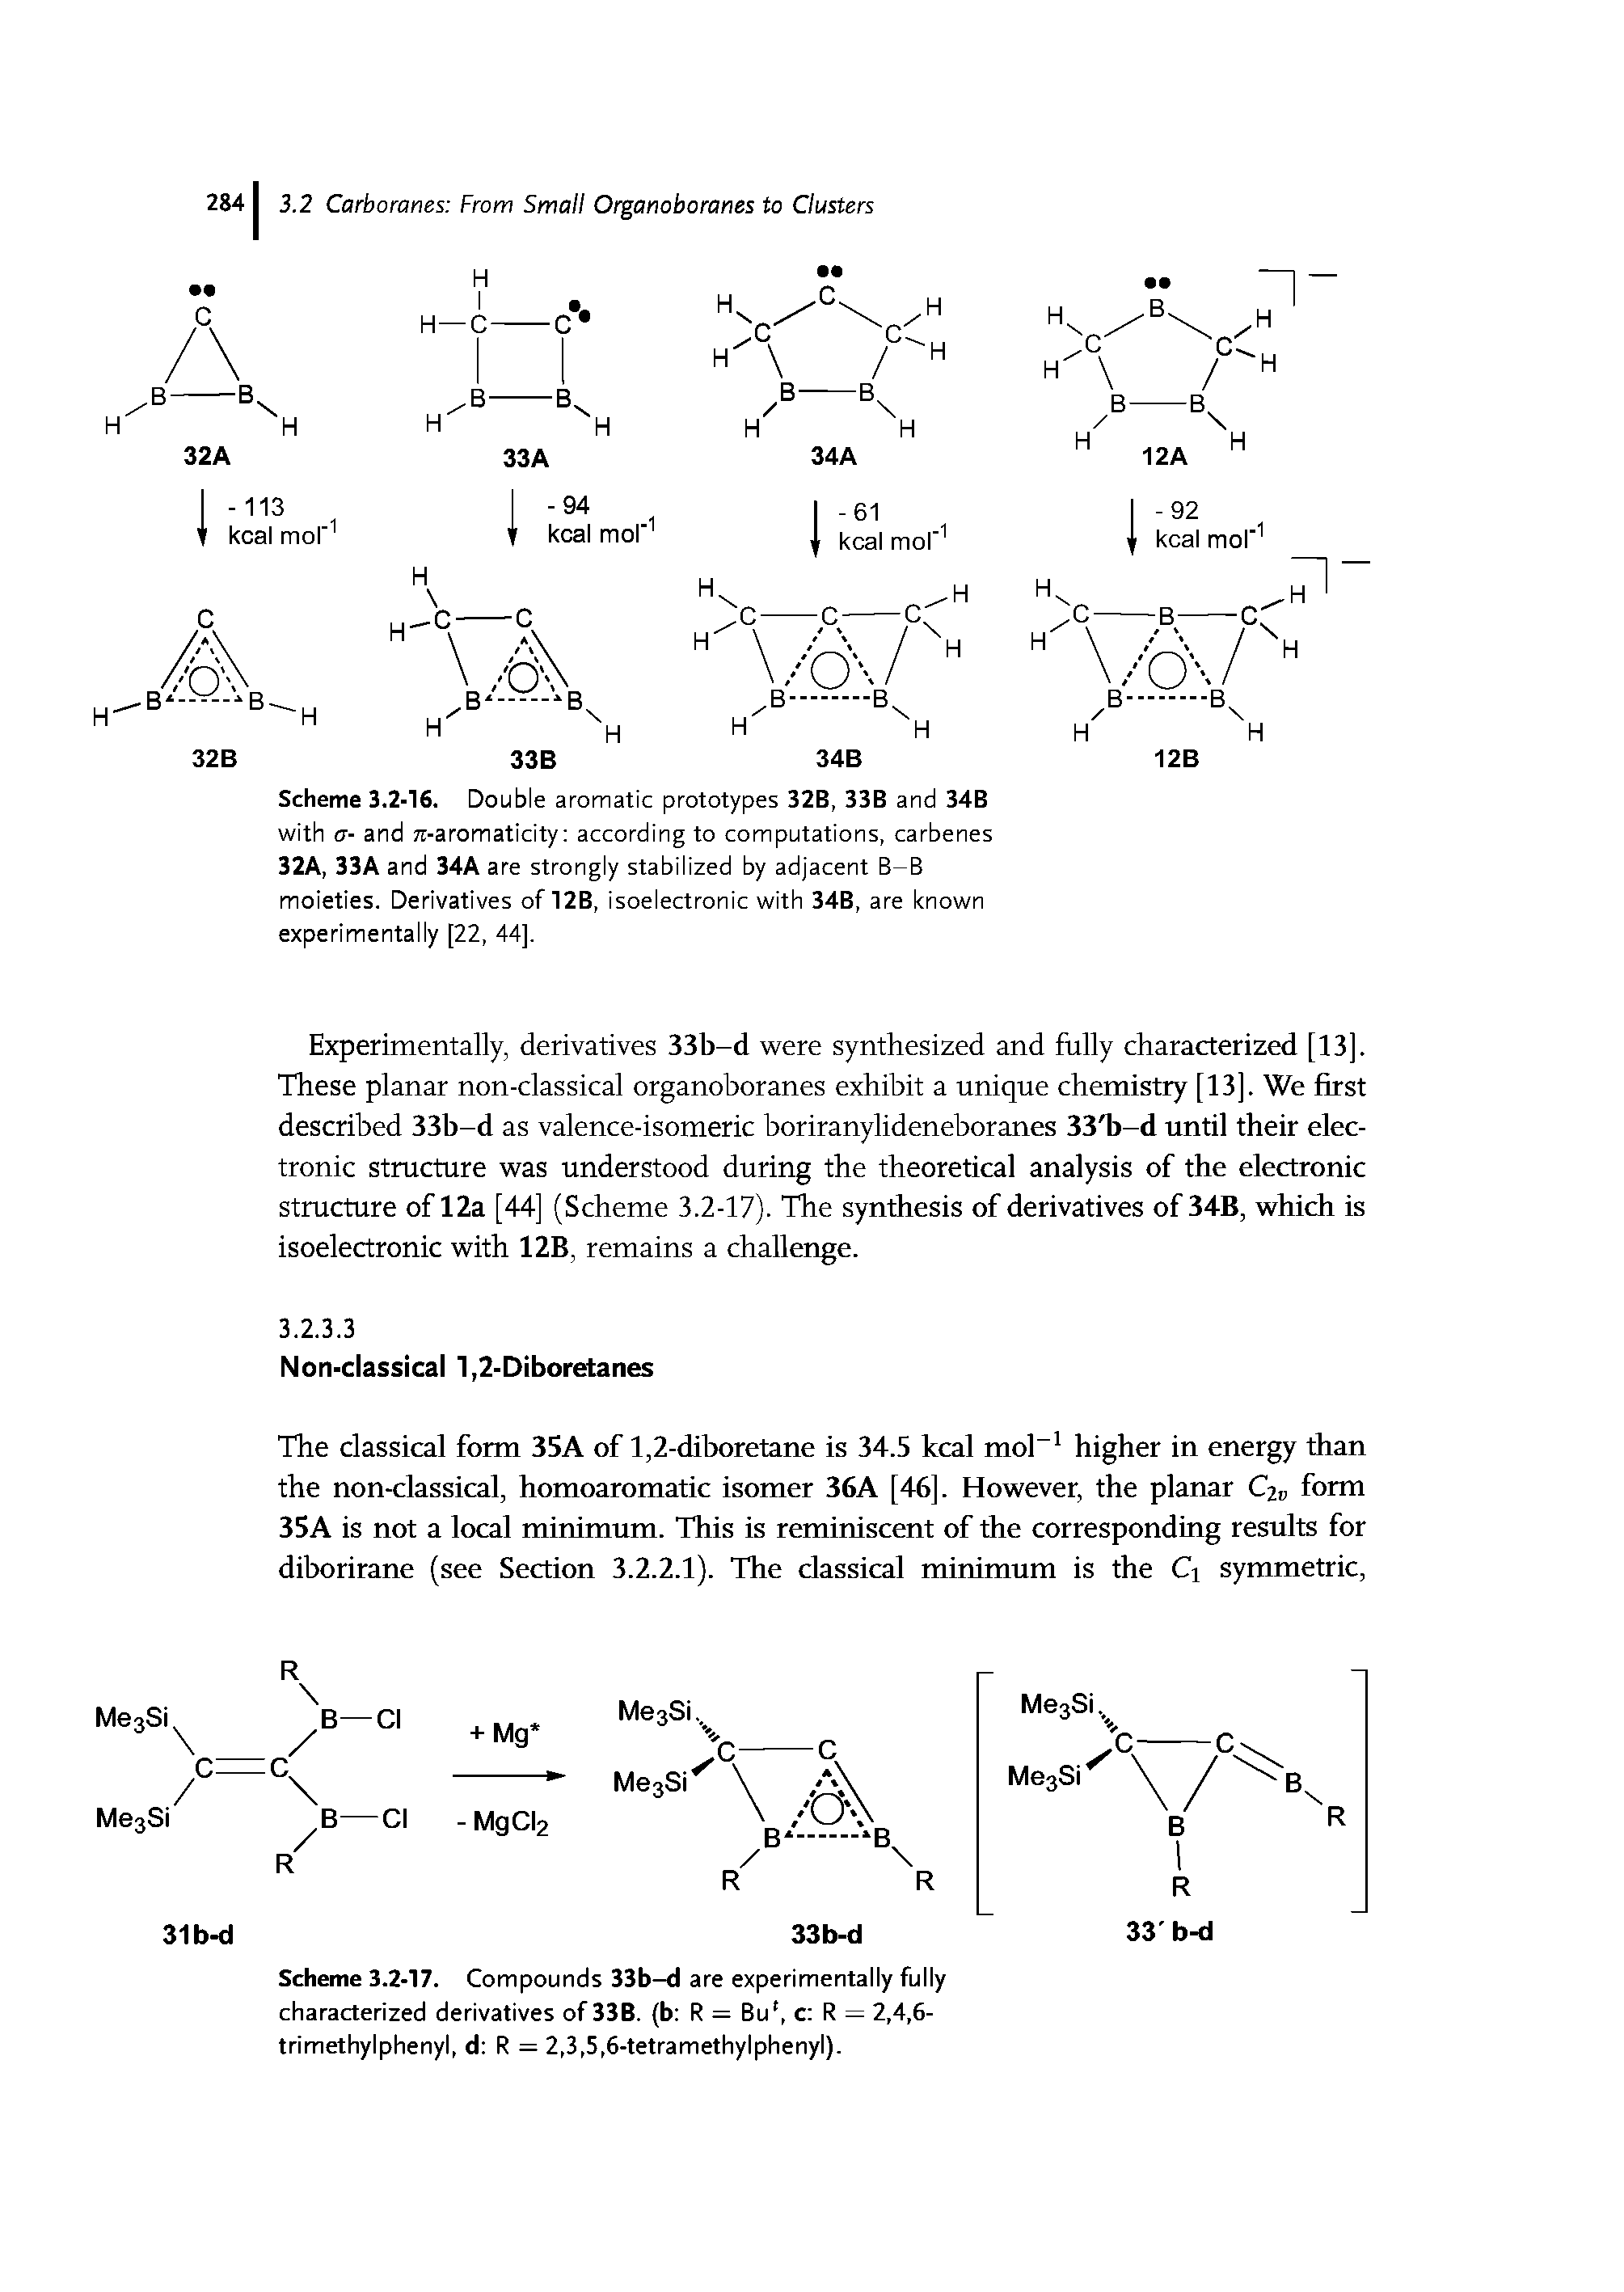 Scheme 3.2-16. Double aromatic prototypes 32B, 33B and 34B with a- and re-aromaticity according to computations, carbenes 32A, 33A and 34A are strongly stabilized by adjacent B-B moieties. Derivatives of 12B, isoelectronic with 34B, are known experimentally [22, 44],...